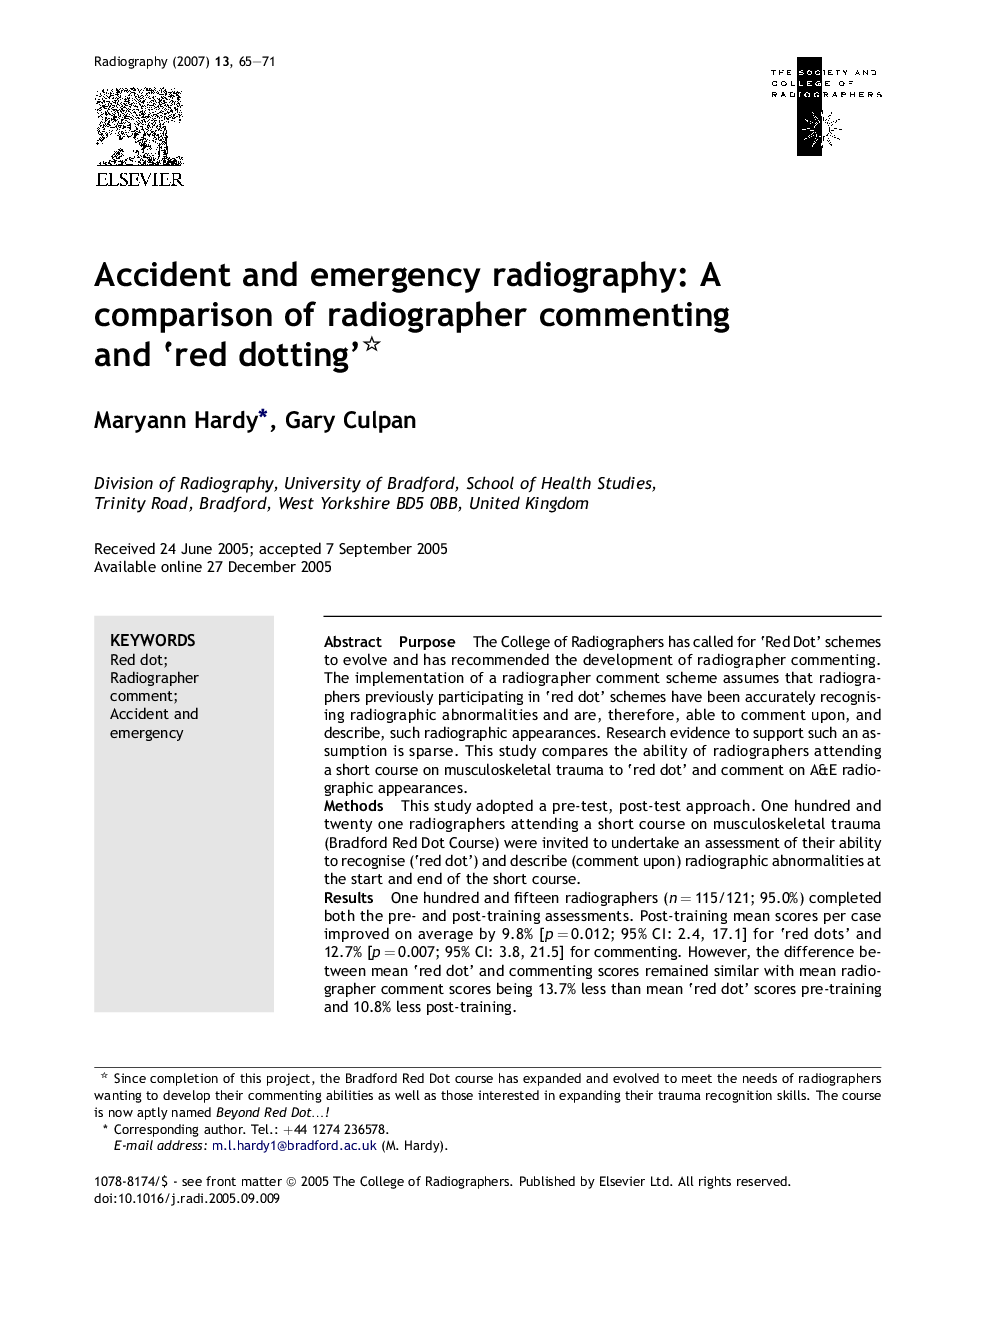 Accident and emergency radiography: A comparison of radiographer commenting and ‘red dotting’ 